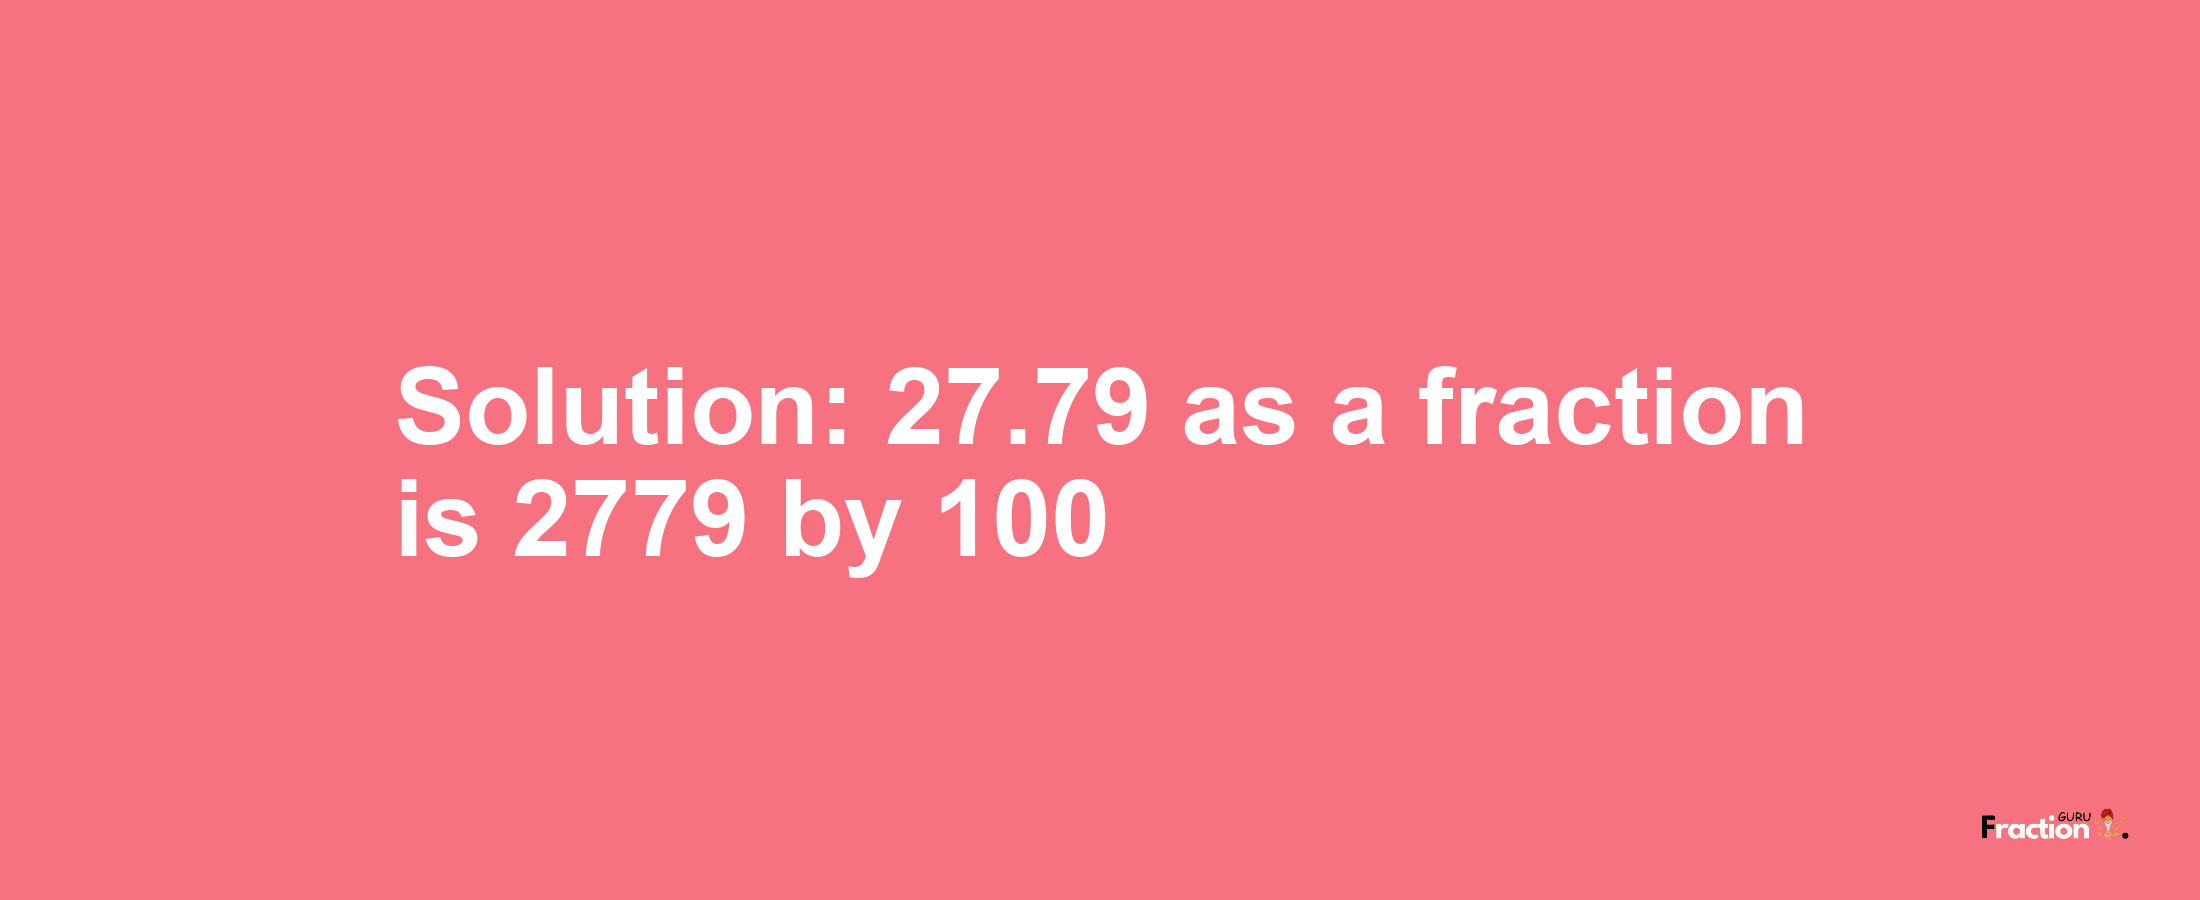 Solution:27.79 as a fraction is 2779/100